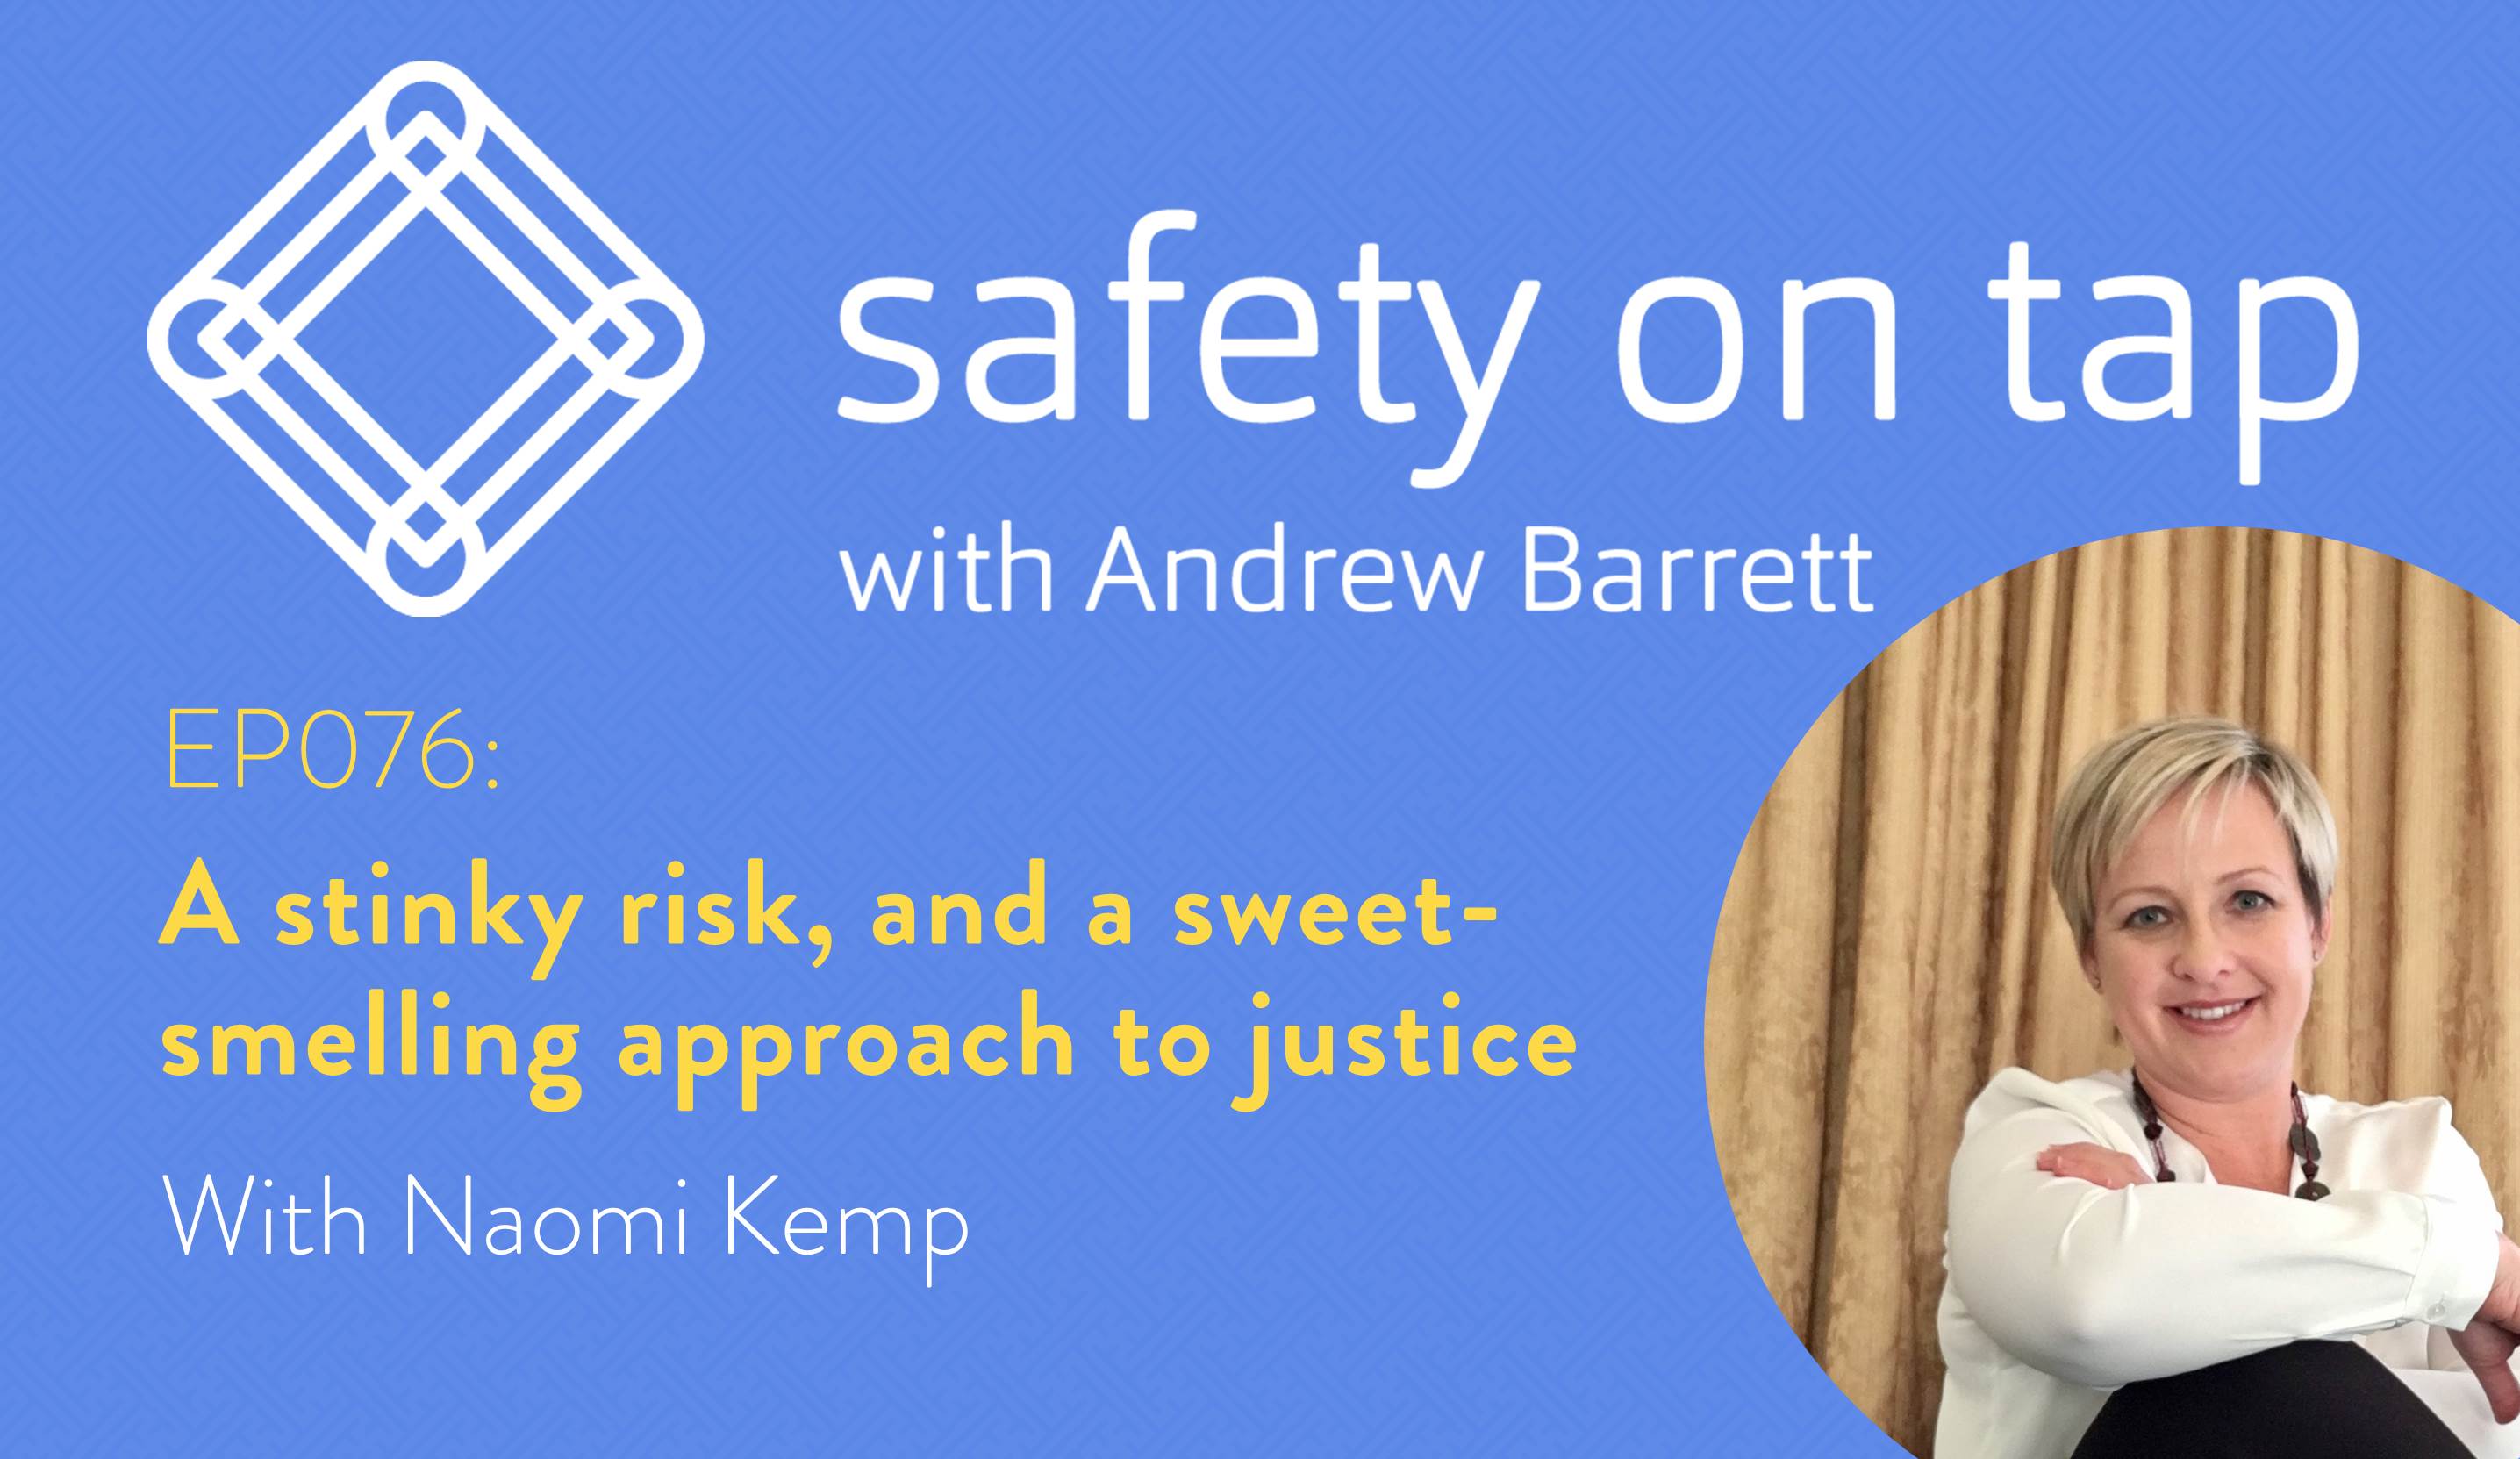 Ep076: A stinky risk, and a sweet-smelling approach to justice, with Naomi Kemp